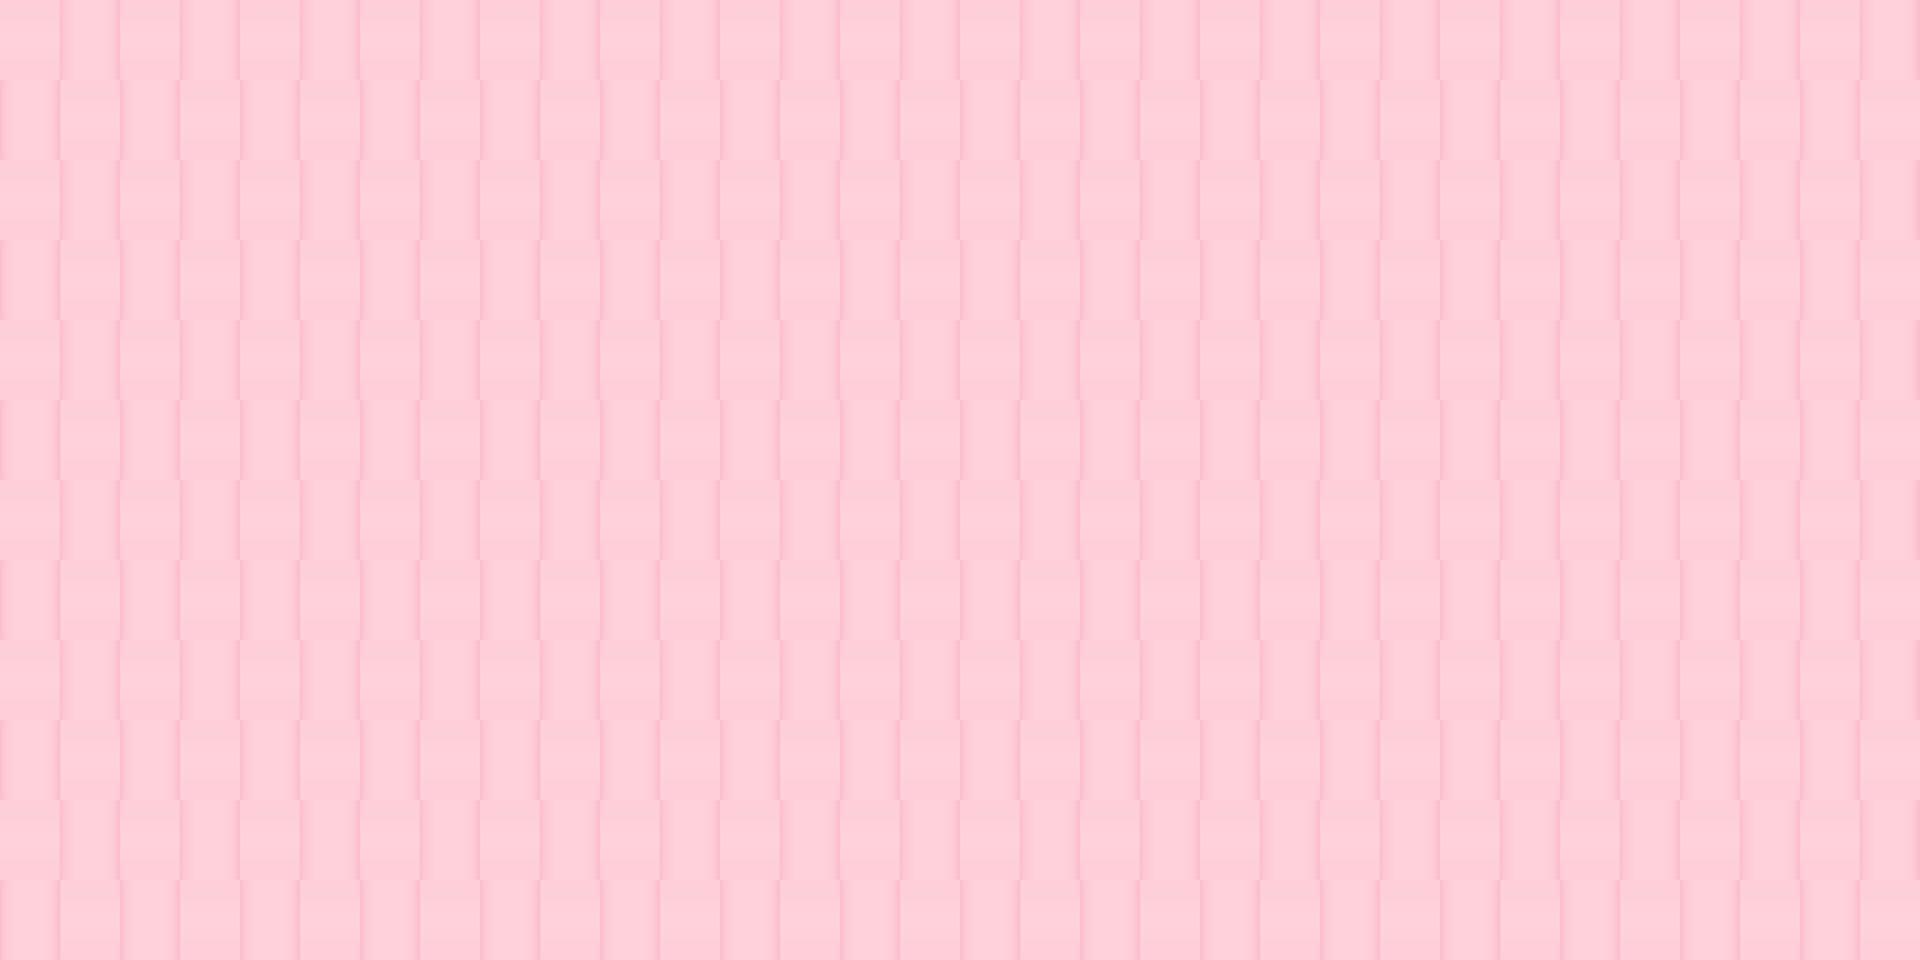 Abstract geometric square seamless pattern pink background. Vector illustration. Eps10